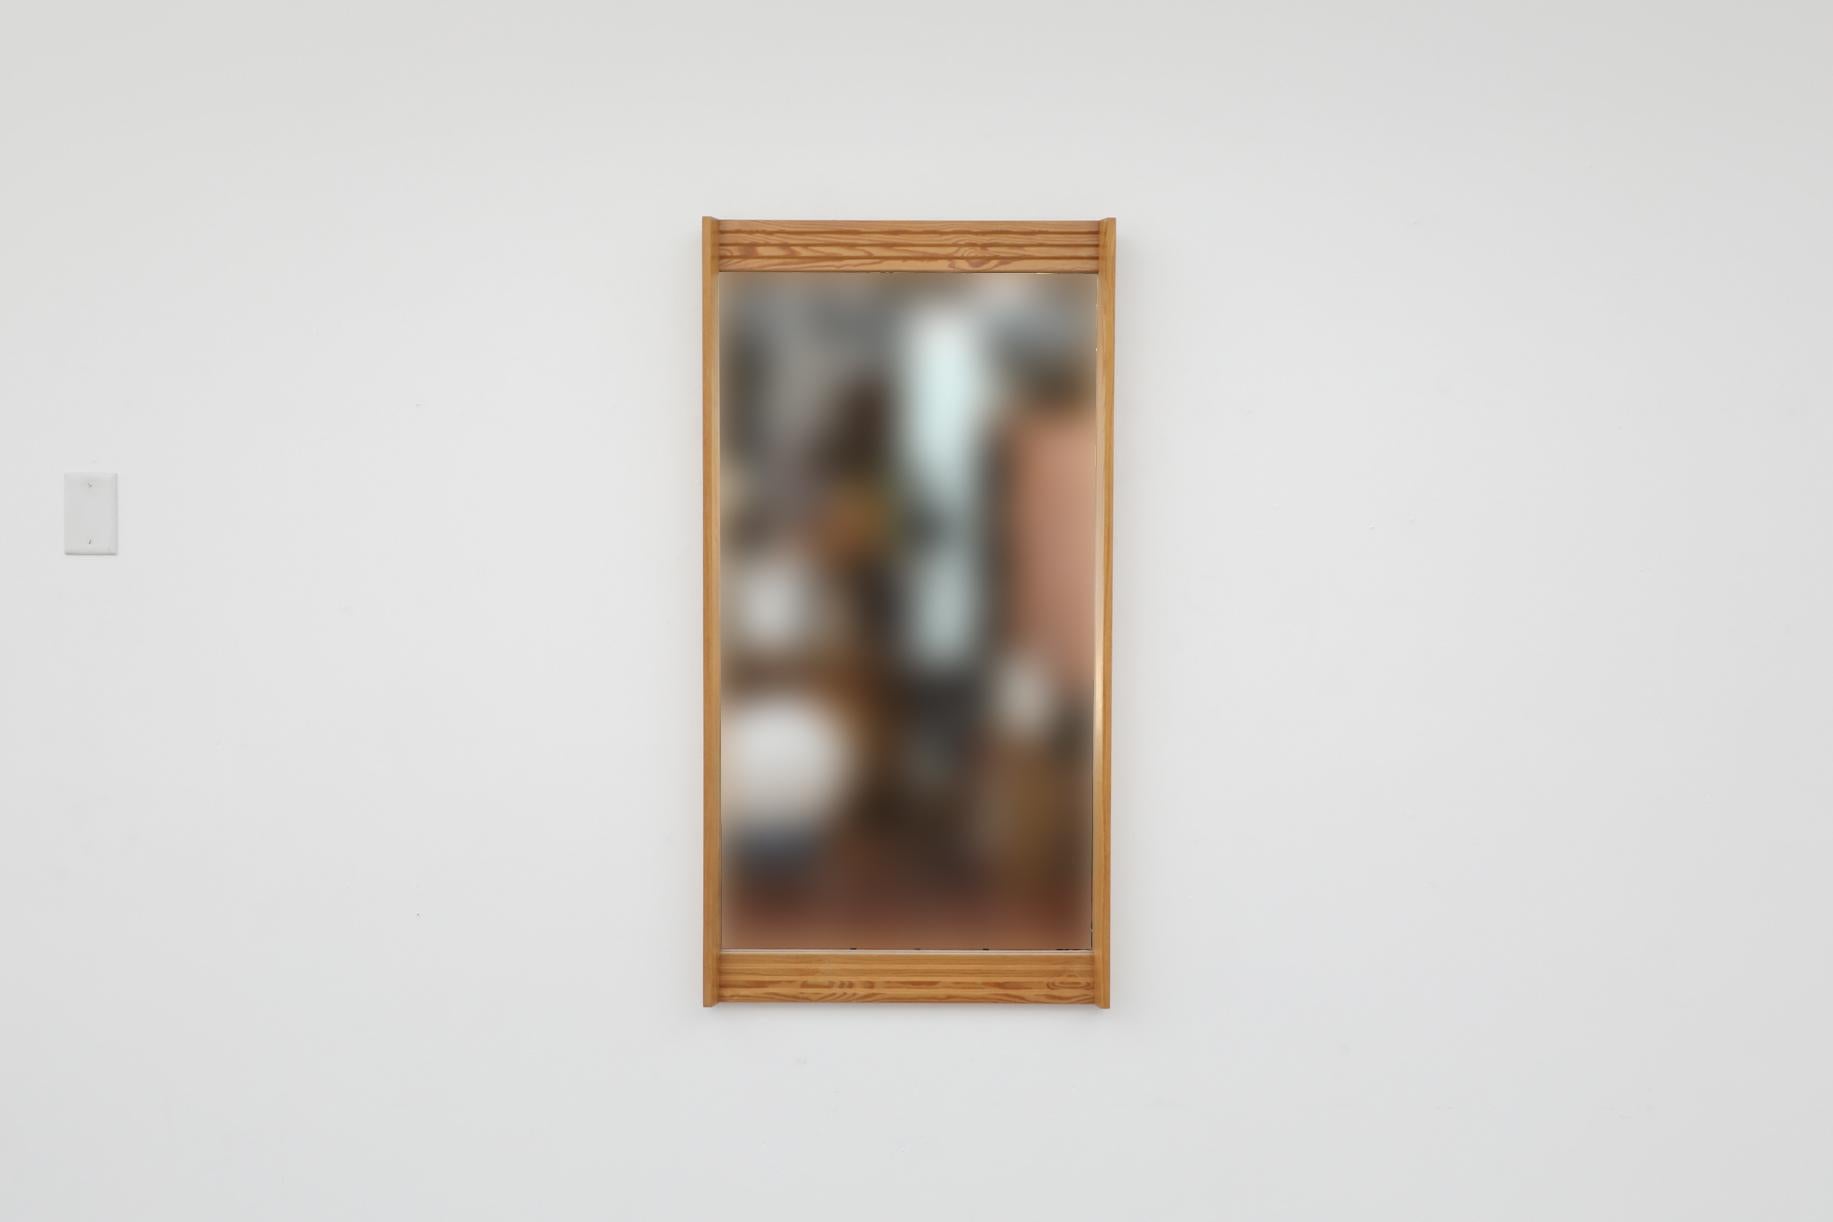 Mid-Century Swedish wall mounted mirror with solid pine, layered-design frame on the top and bottom. In original condition with visible wear consistent with its age and use.

